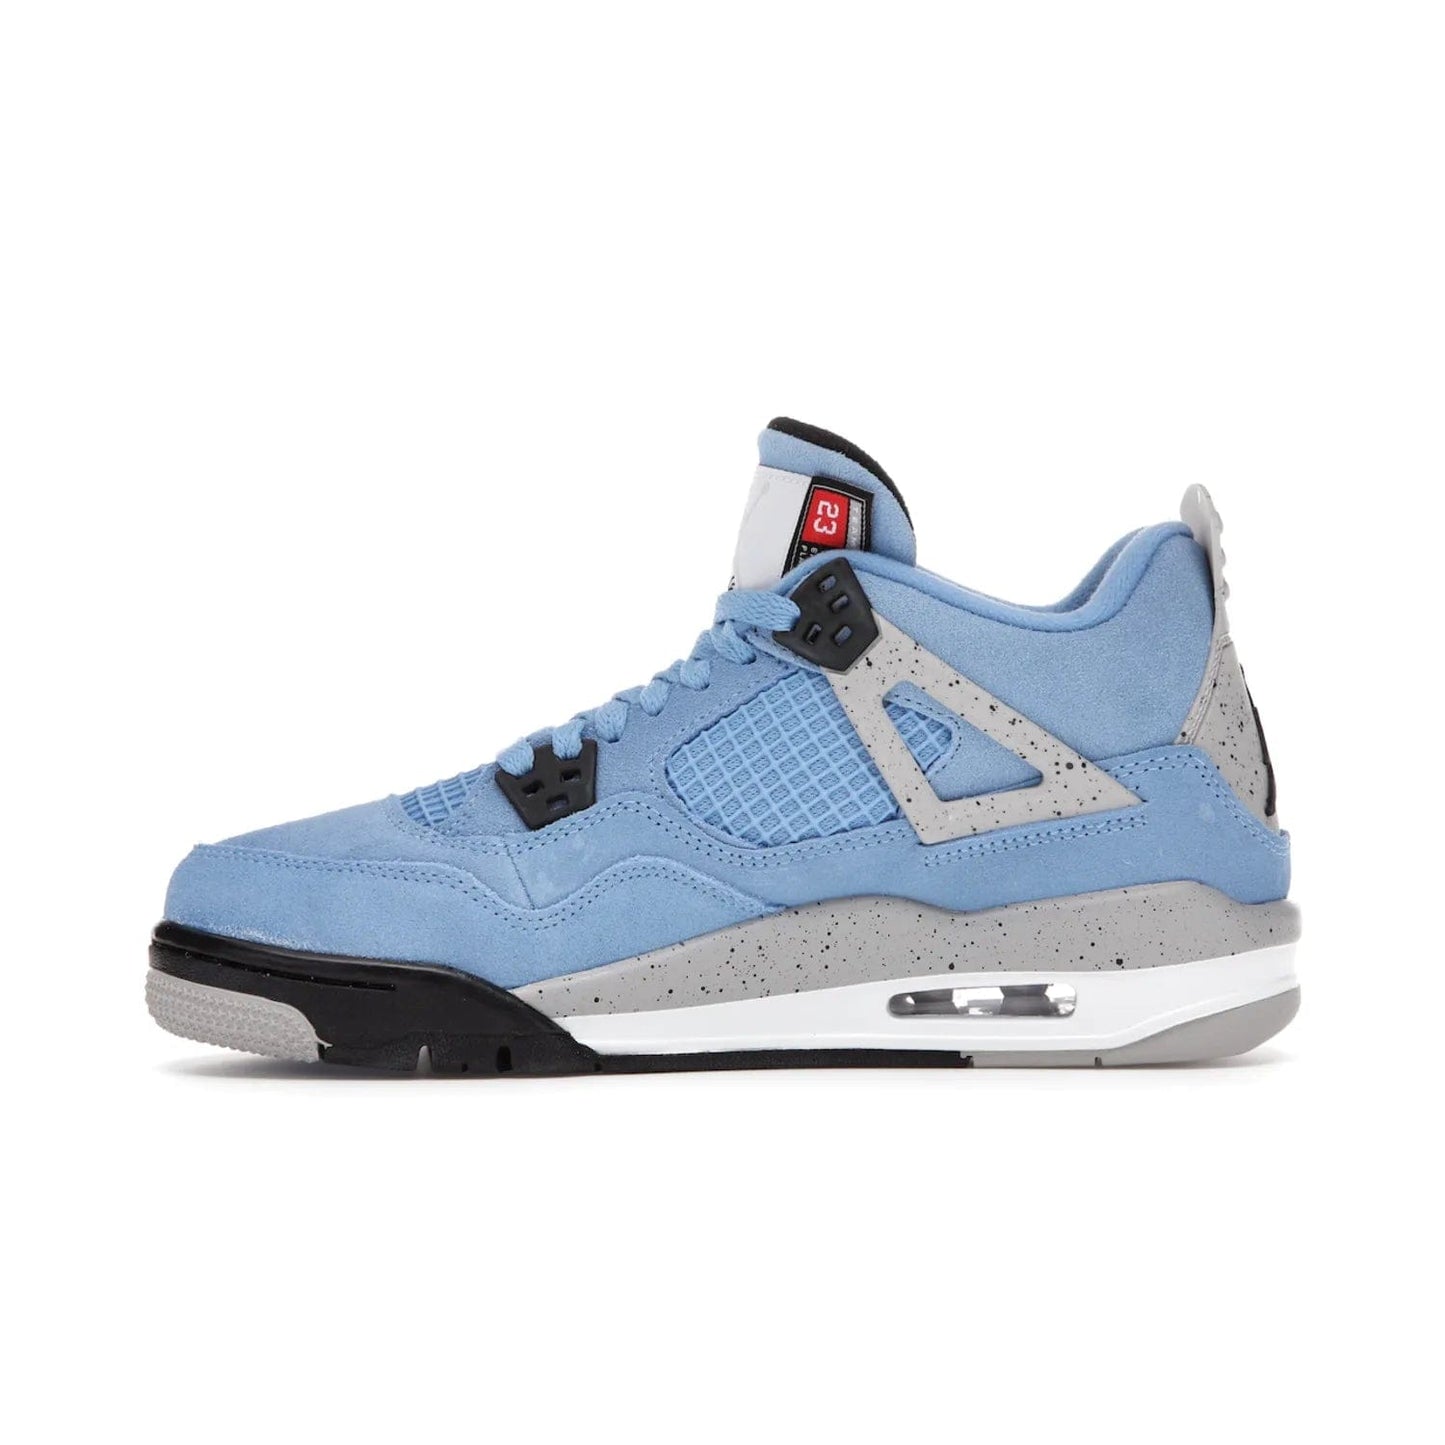 Jordan 4 Retro University Blue (GS) - Image 19 - Only at www.BallersClubKickz.com - Air Jordan 4 Retro University Blue GS: Classic silhouette and vibrant colors. Featuring a suede upper and Jumpman icon, this grade school-size shoe is perfect for collections and retails at $150.